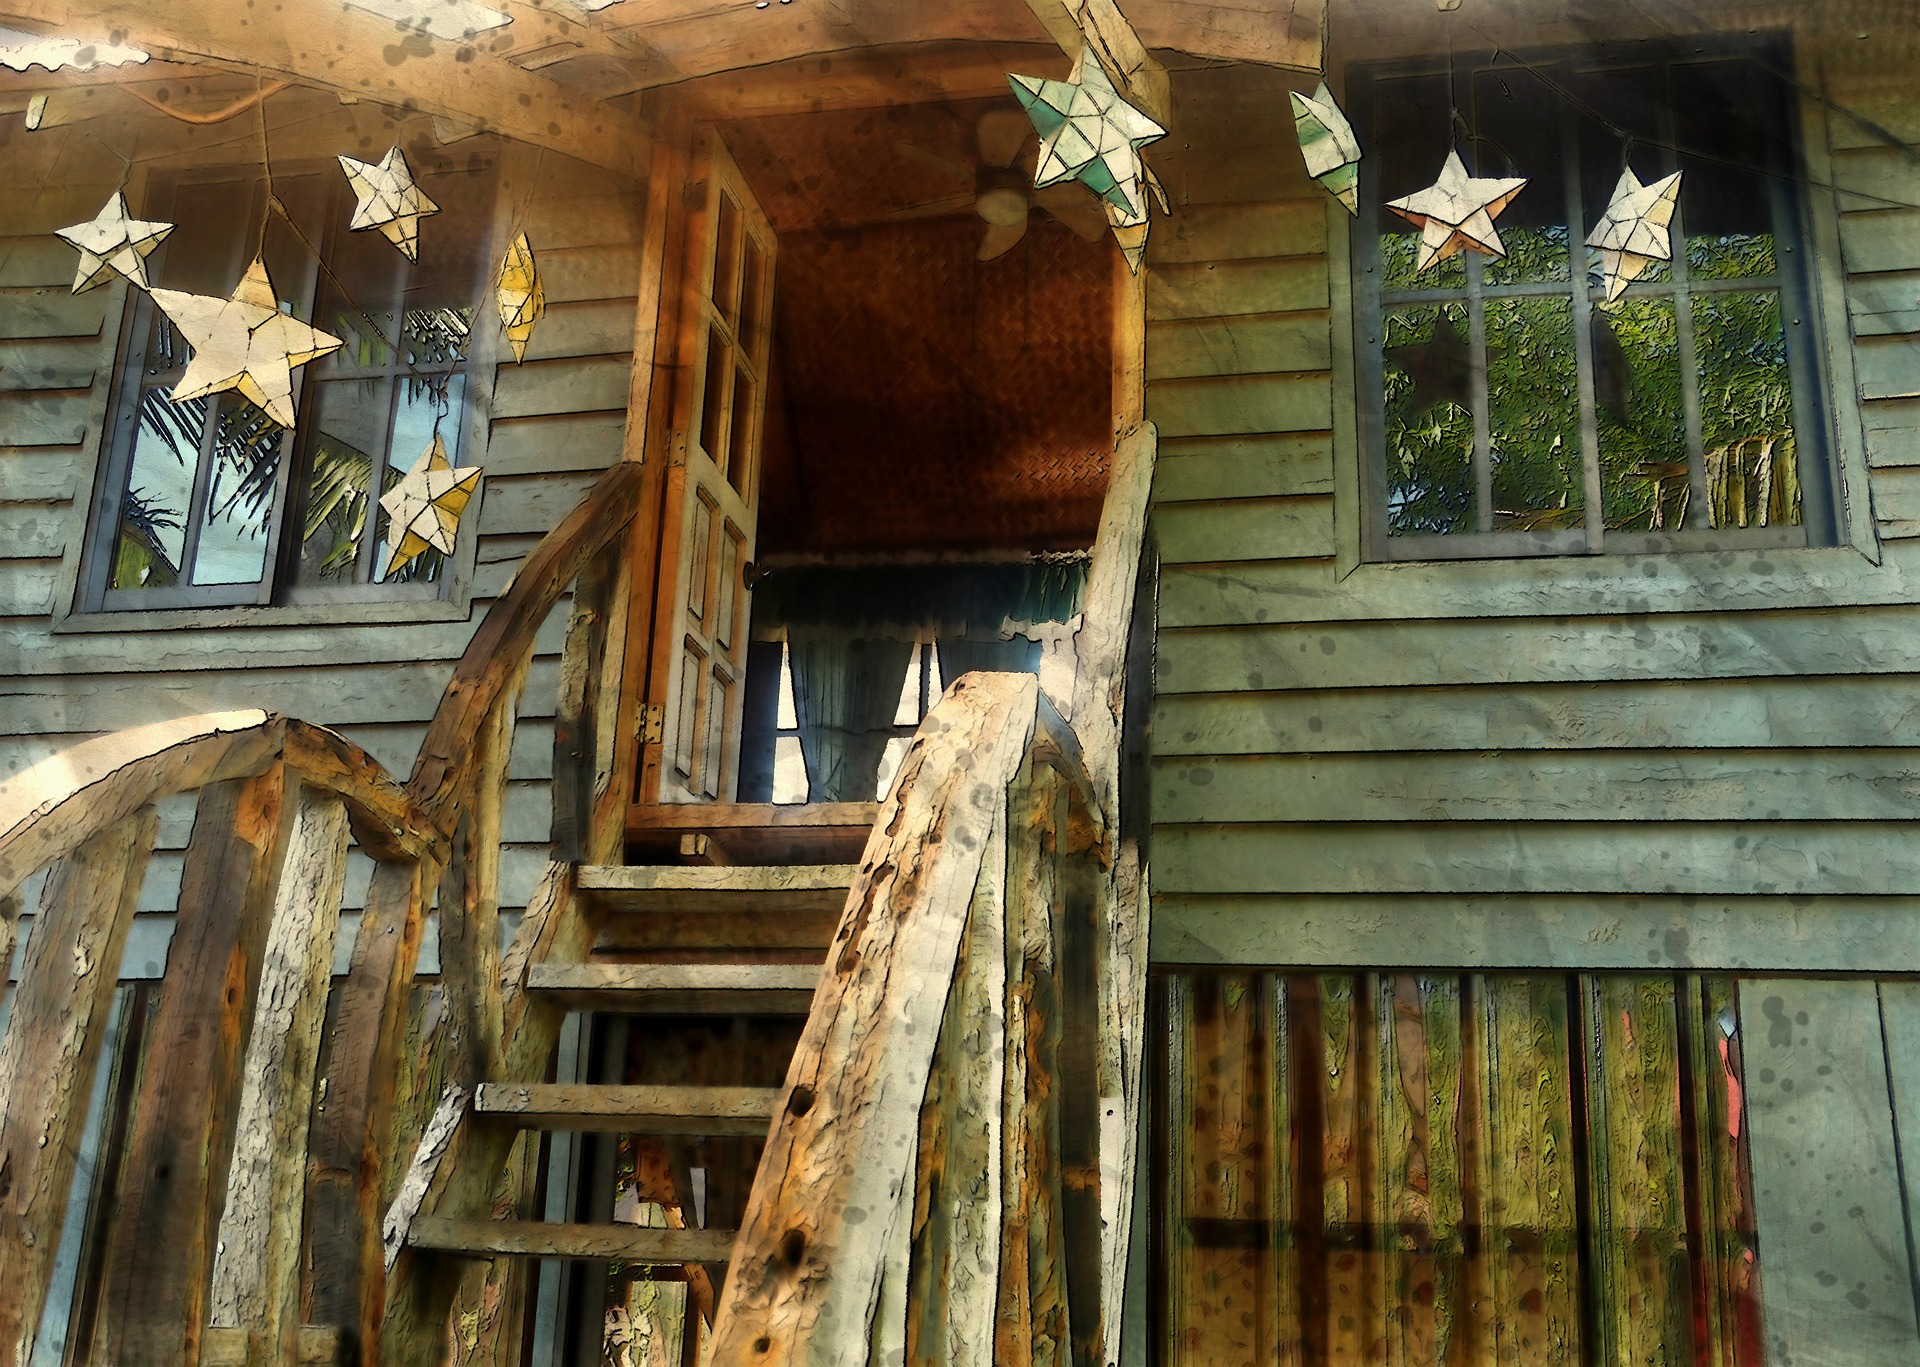 wooden-old-stairs-4265880_1920.jpg